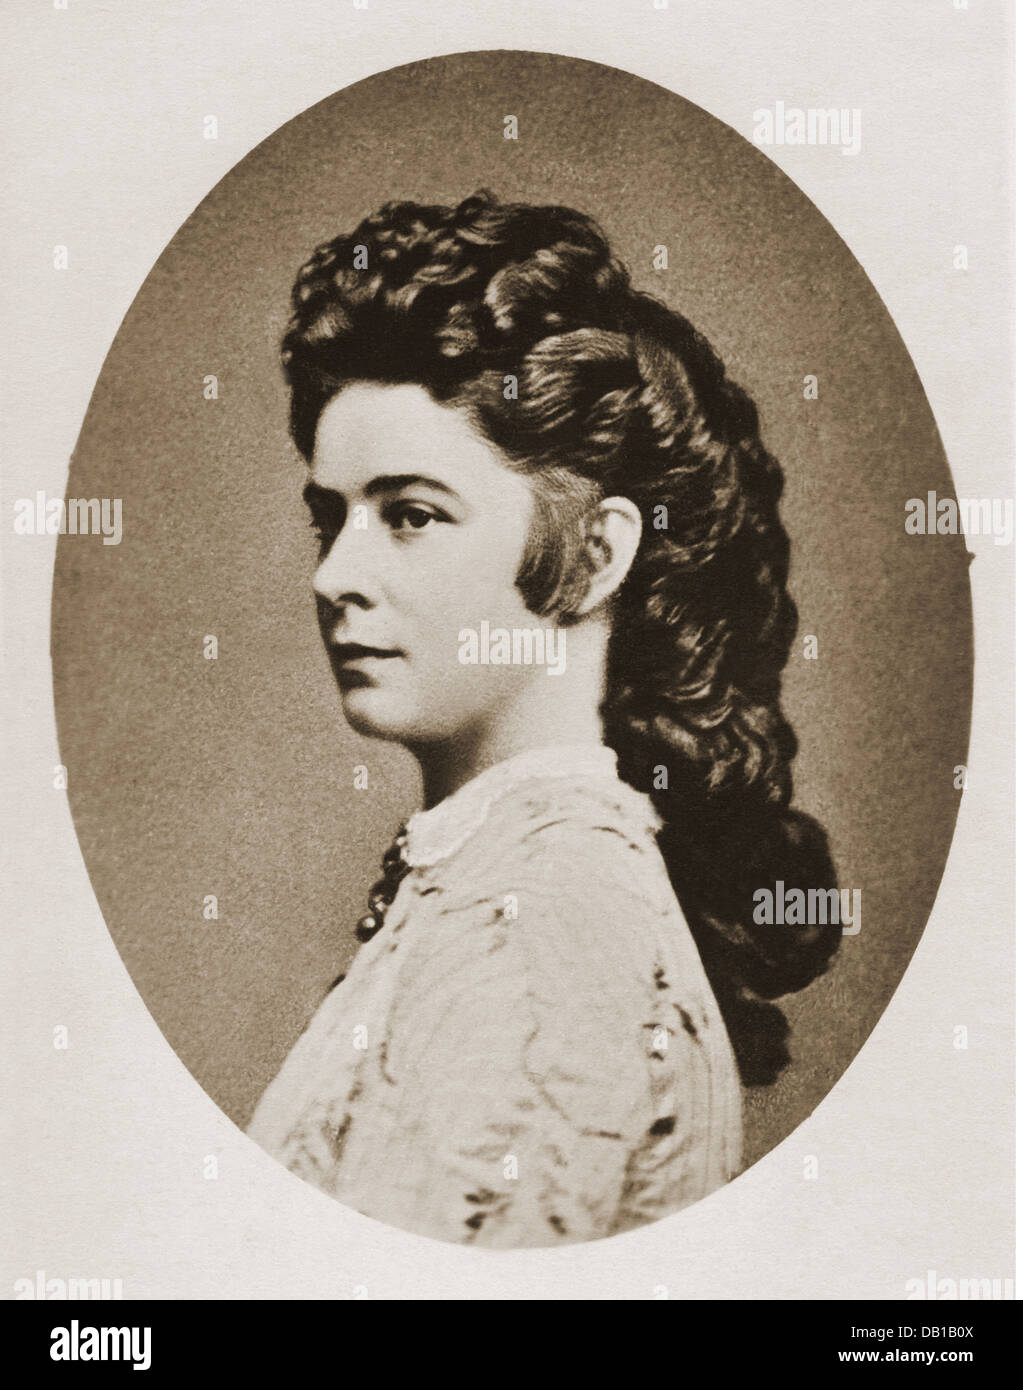 Elisabeth Amalie 'Sisi', 25.12.1837 - 9.9.1898, Empress of Austria 24.4.1854 - 9.9.1898, portrait, after photograph by Ludwig Angerer, Vienna, 1864, House of Wittelsbach, princess in Bavaria, archduchess, Queen of Hungary, Dual-Monarchy, Austria-Hungary, Habsburg Lorraine, Habsburg-Lorraine, 19th century, people, woman, female, Stock Photo